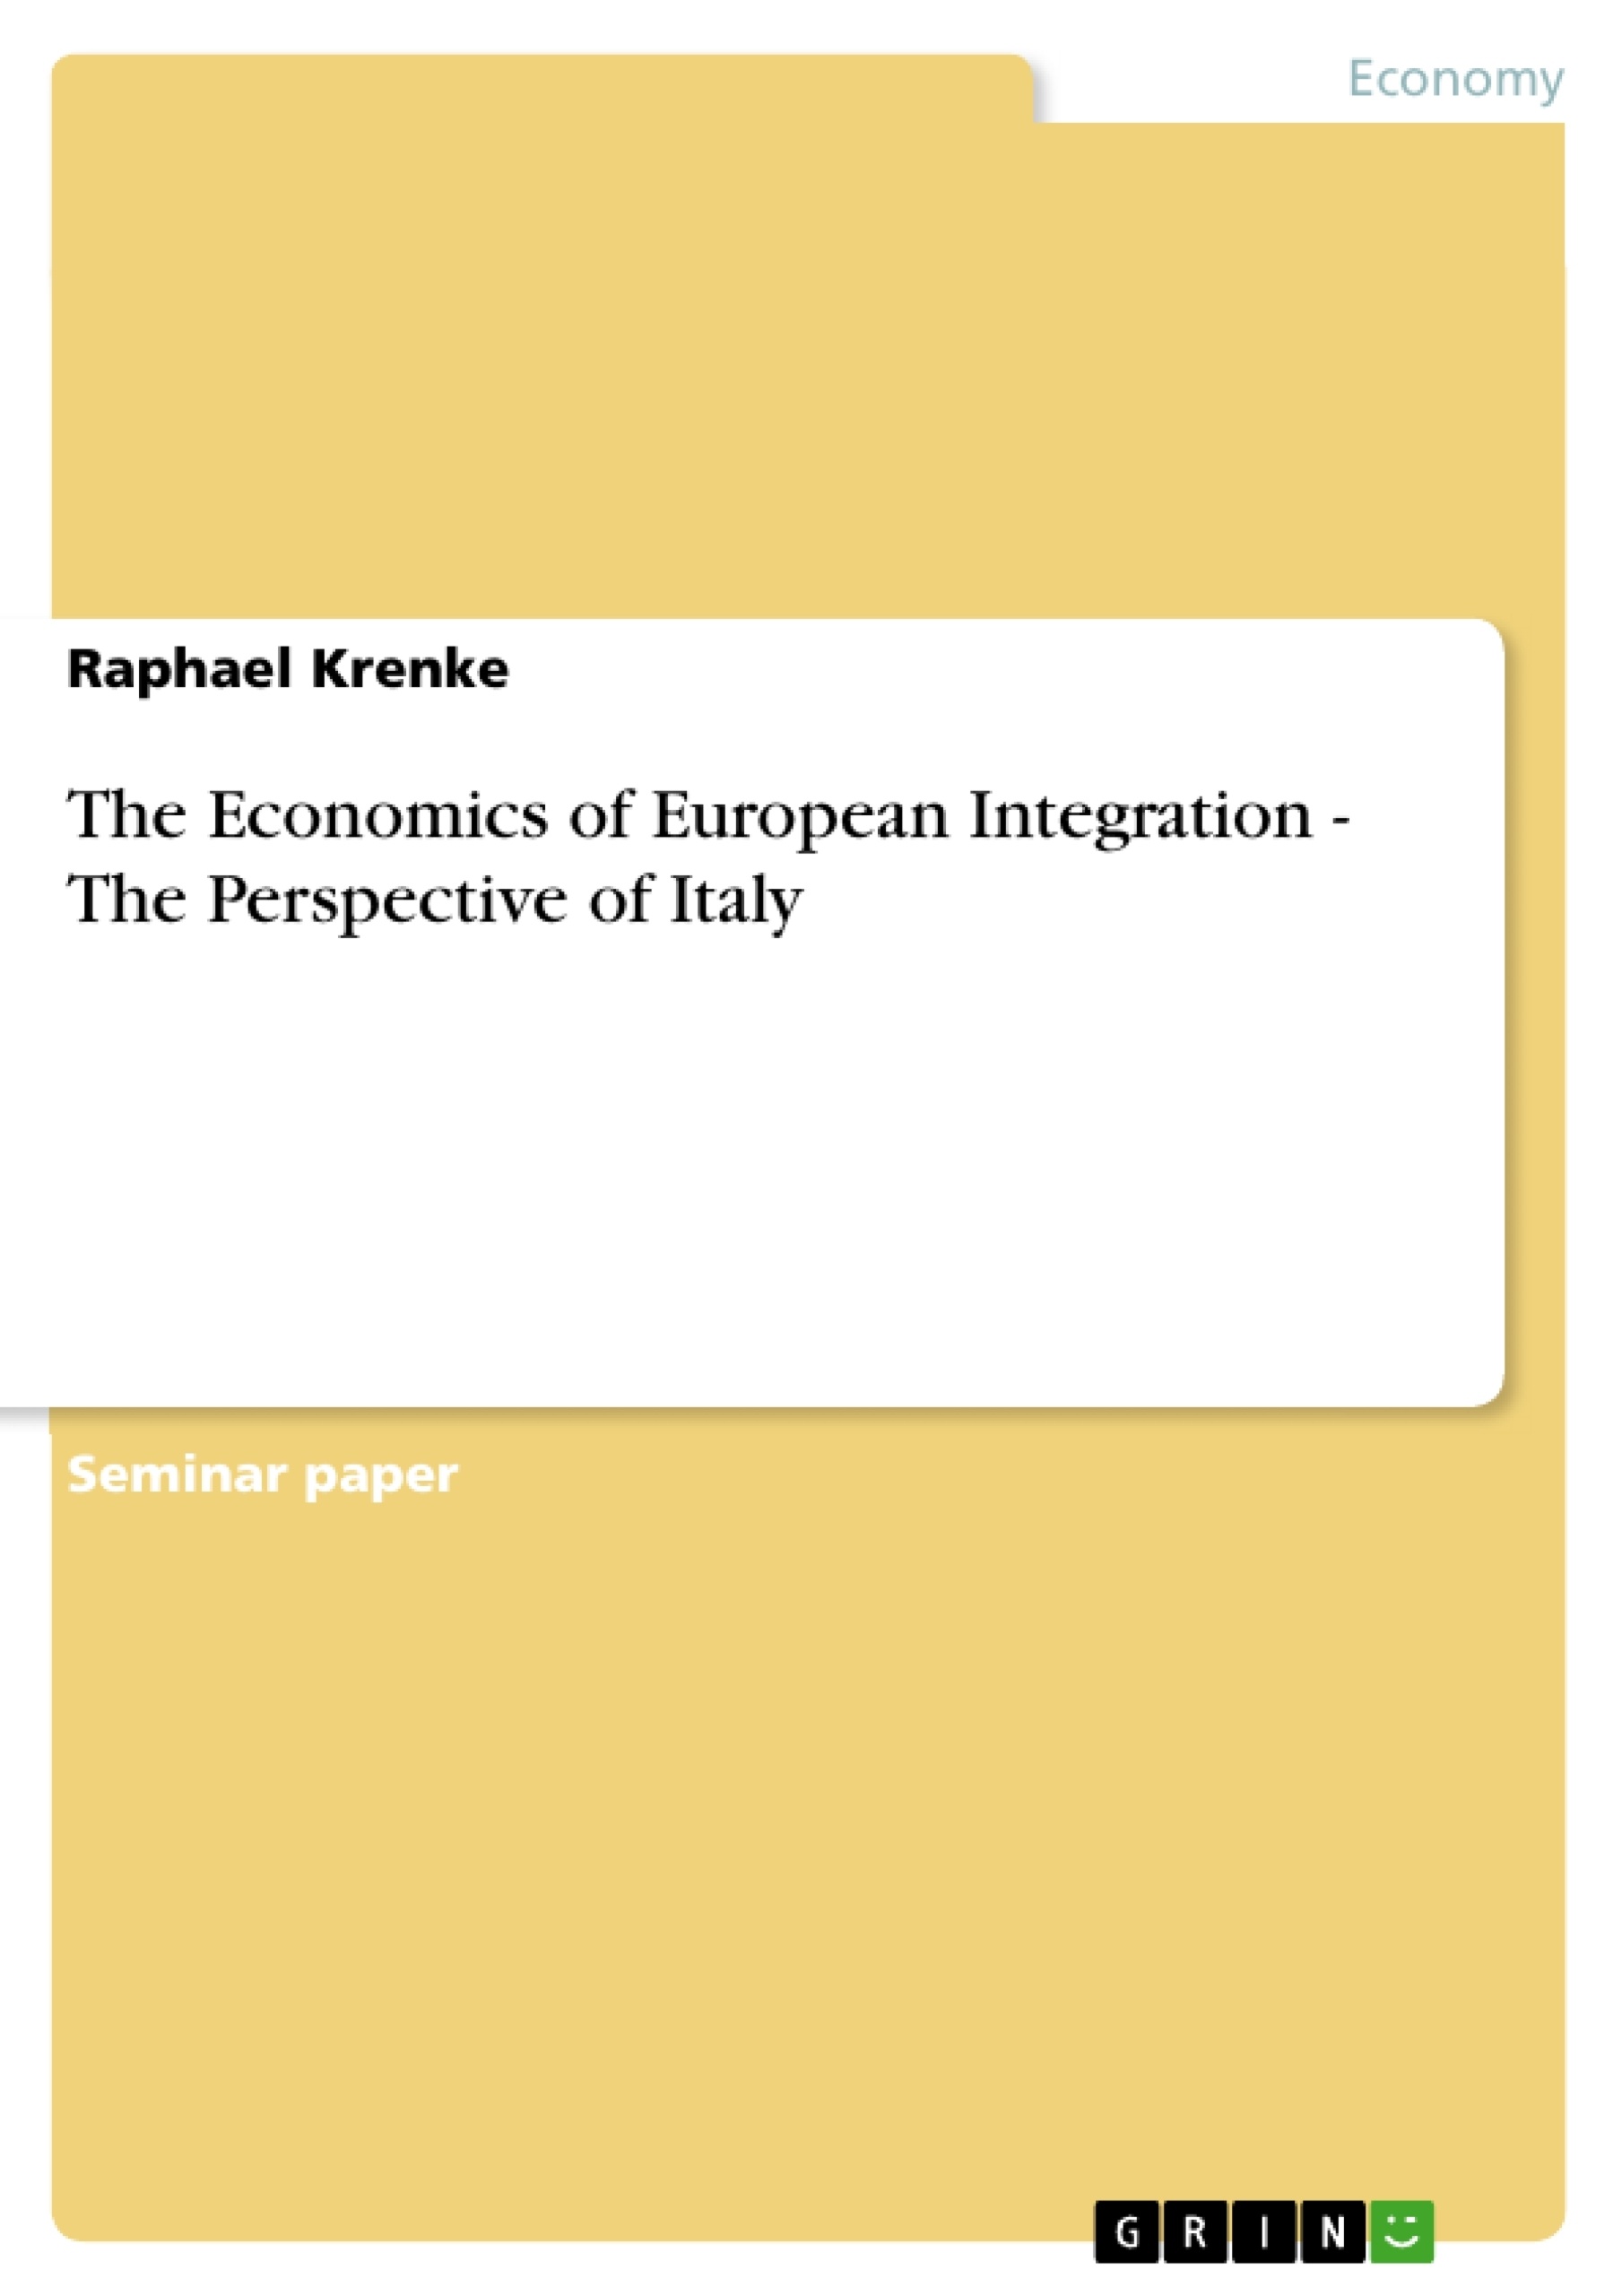 Title: The Economics of European Integration - The Perspective of Italy